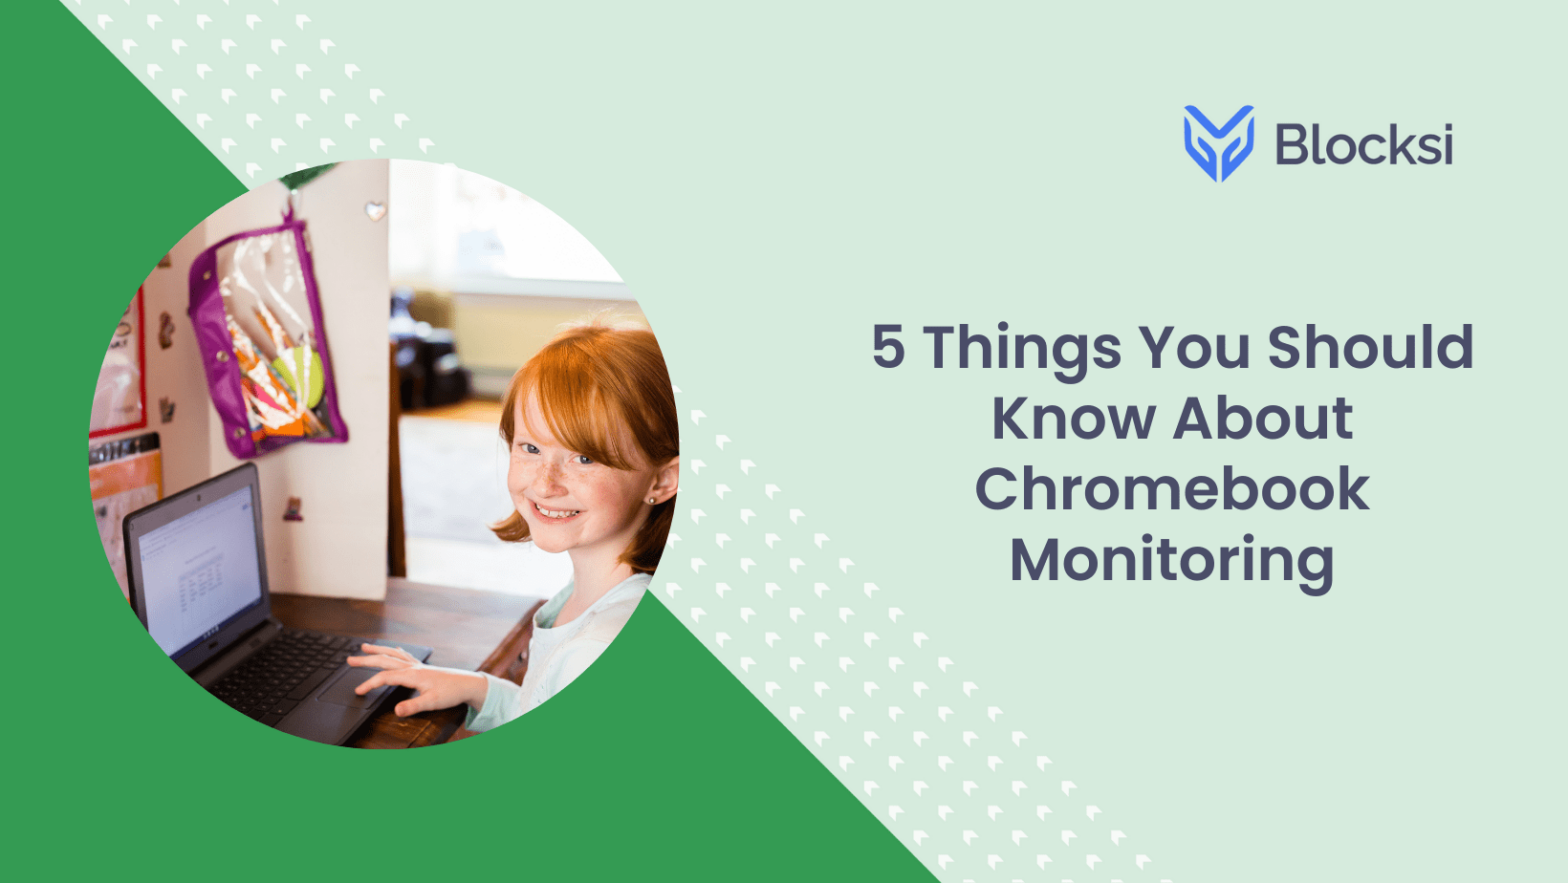 5 Things You Should Know About Chromebook Monitoring